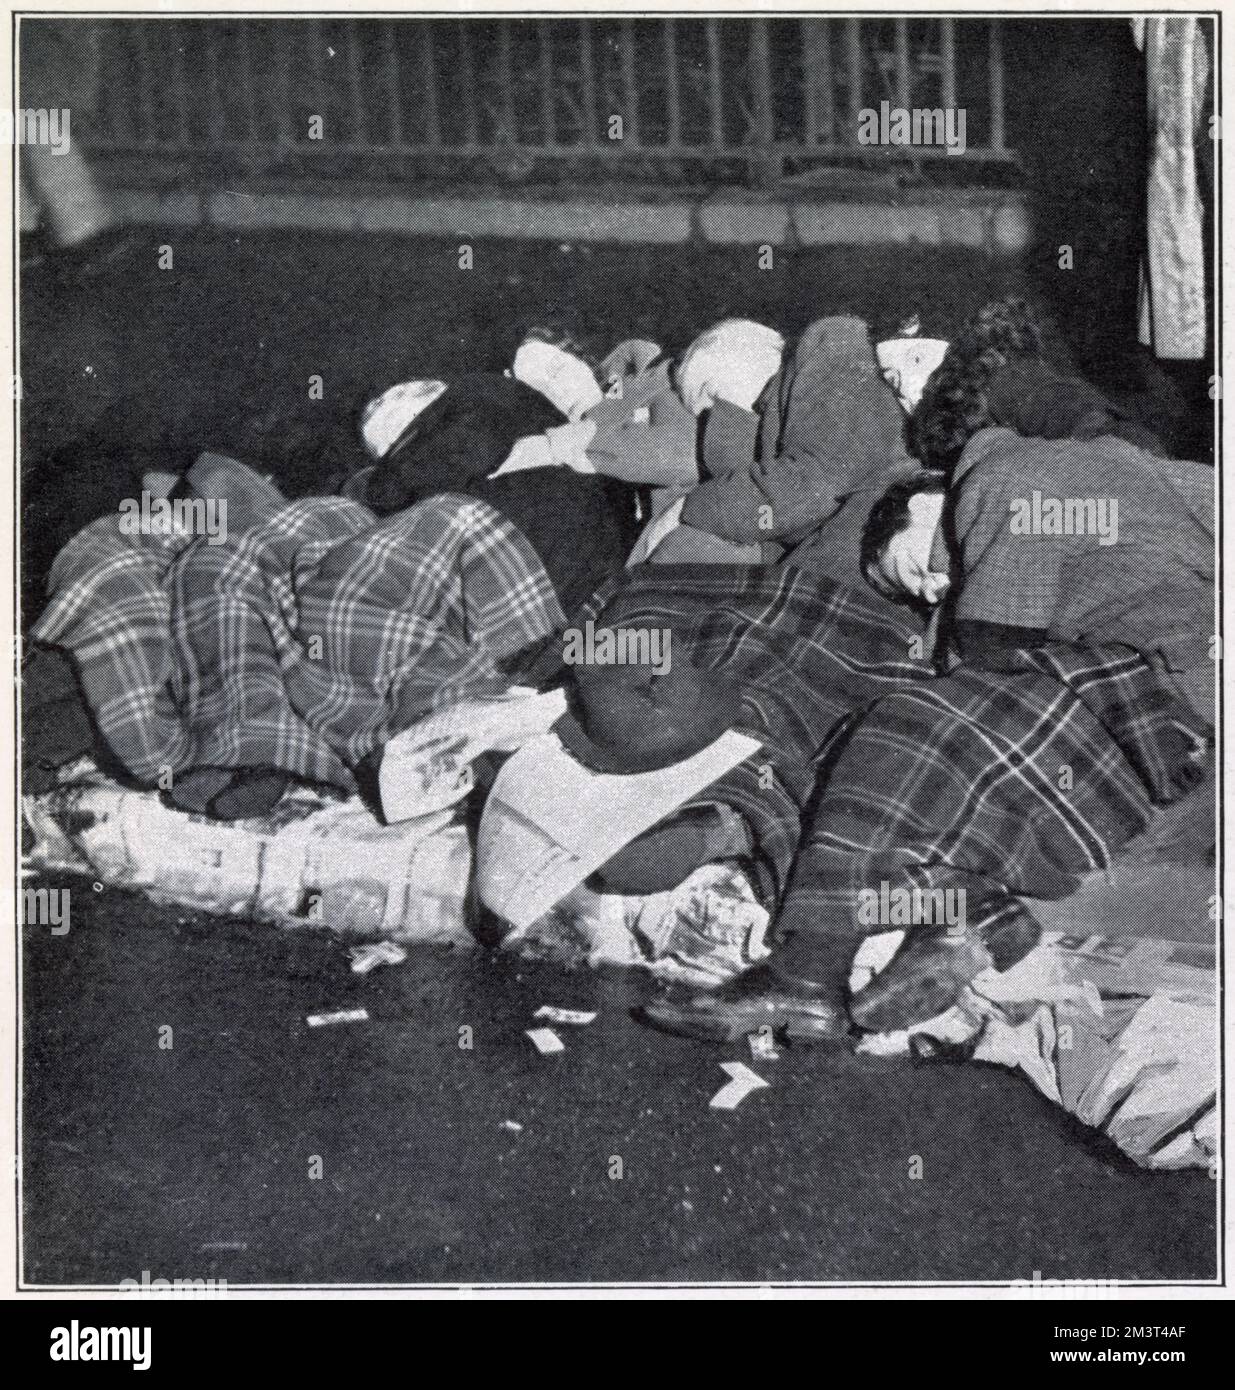 People who have staked their place along the route of King George V's funeral procession catching some sleep on the pavement on Piccadilly at 3am in the morning. Stock Photo